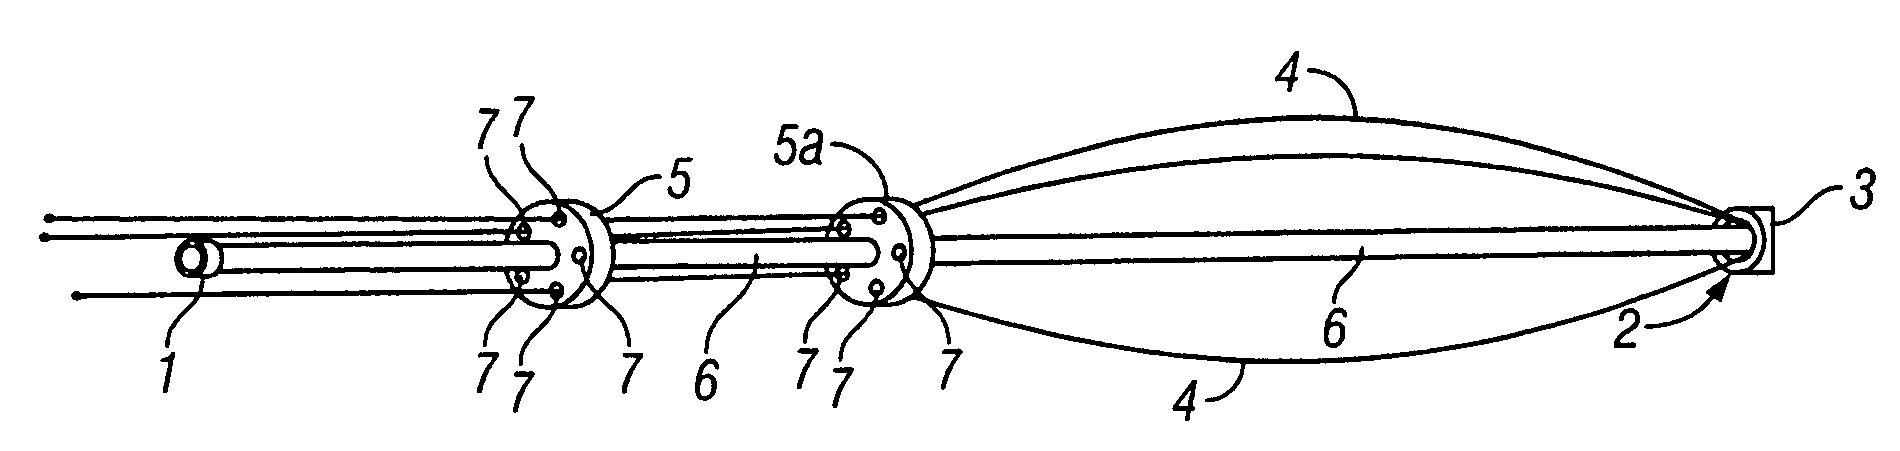 Expandable surgical retractor for internal body spaces approached with minimally invasive incisions or through existing orifices